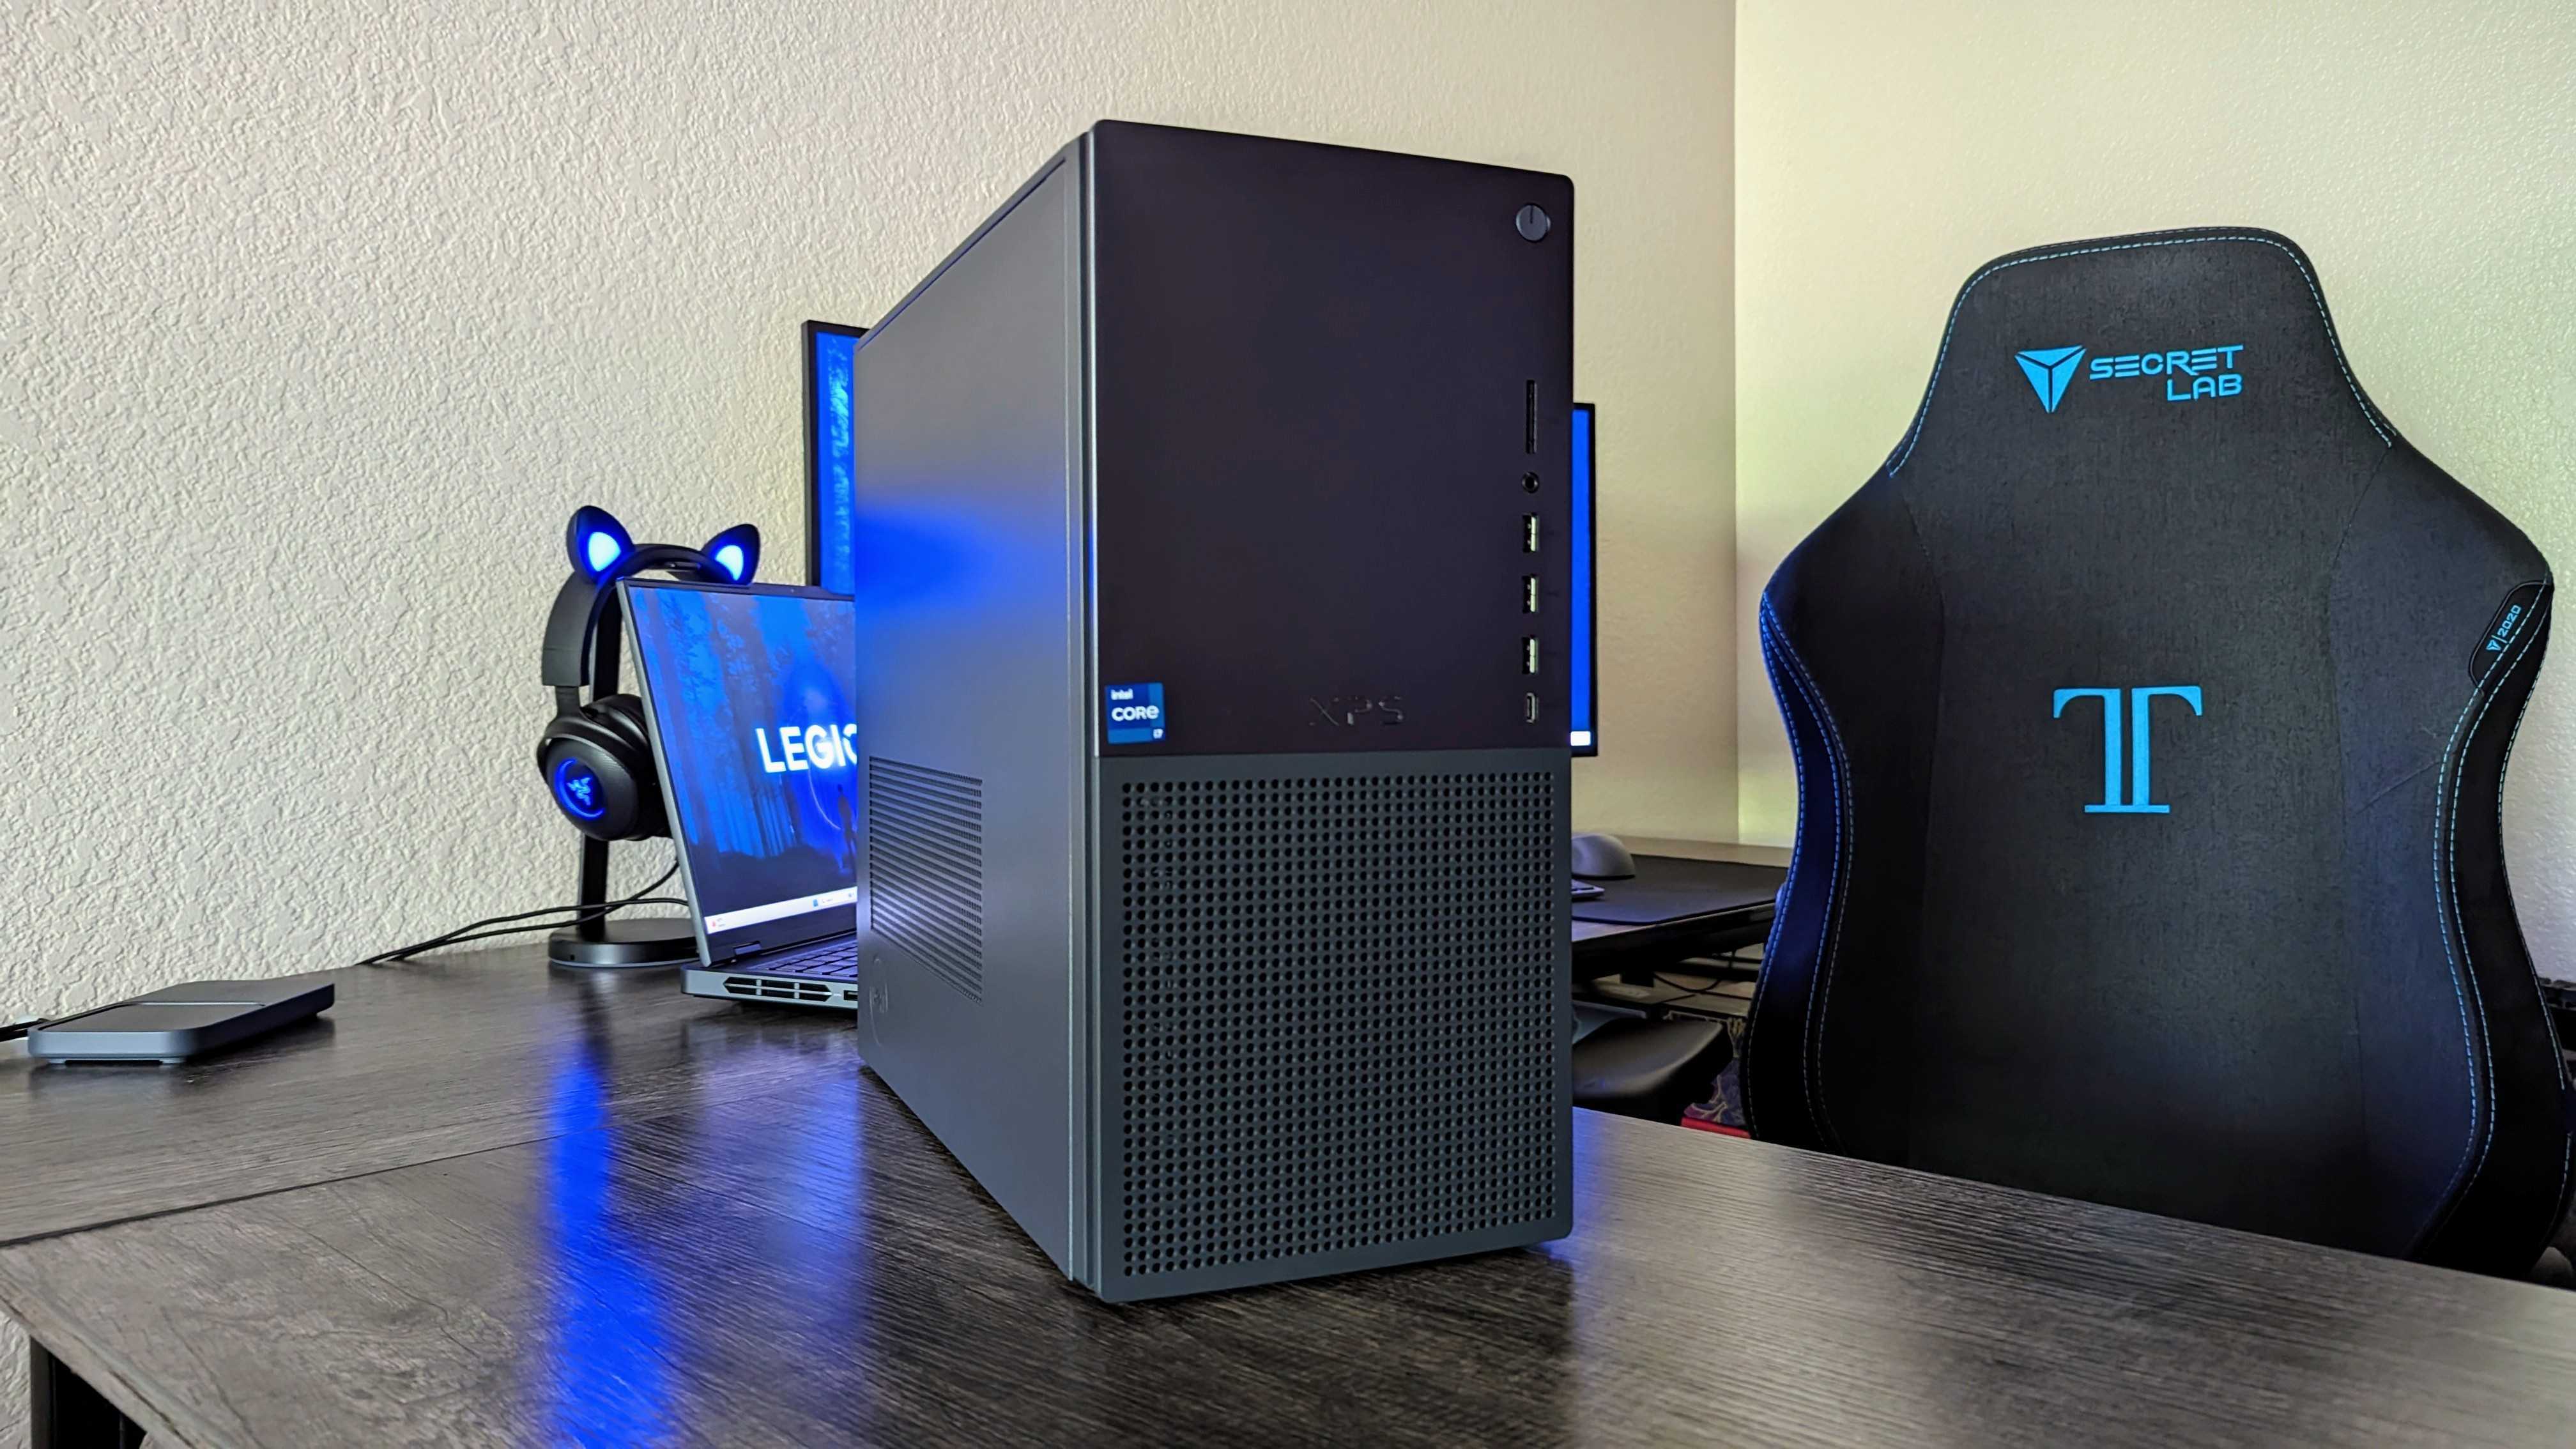 HP Omen 17 (2019) review: Solid performance that's shockingly affordable